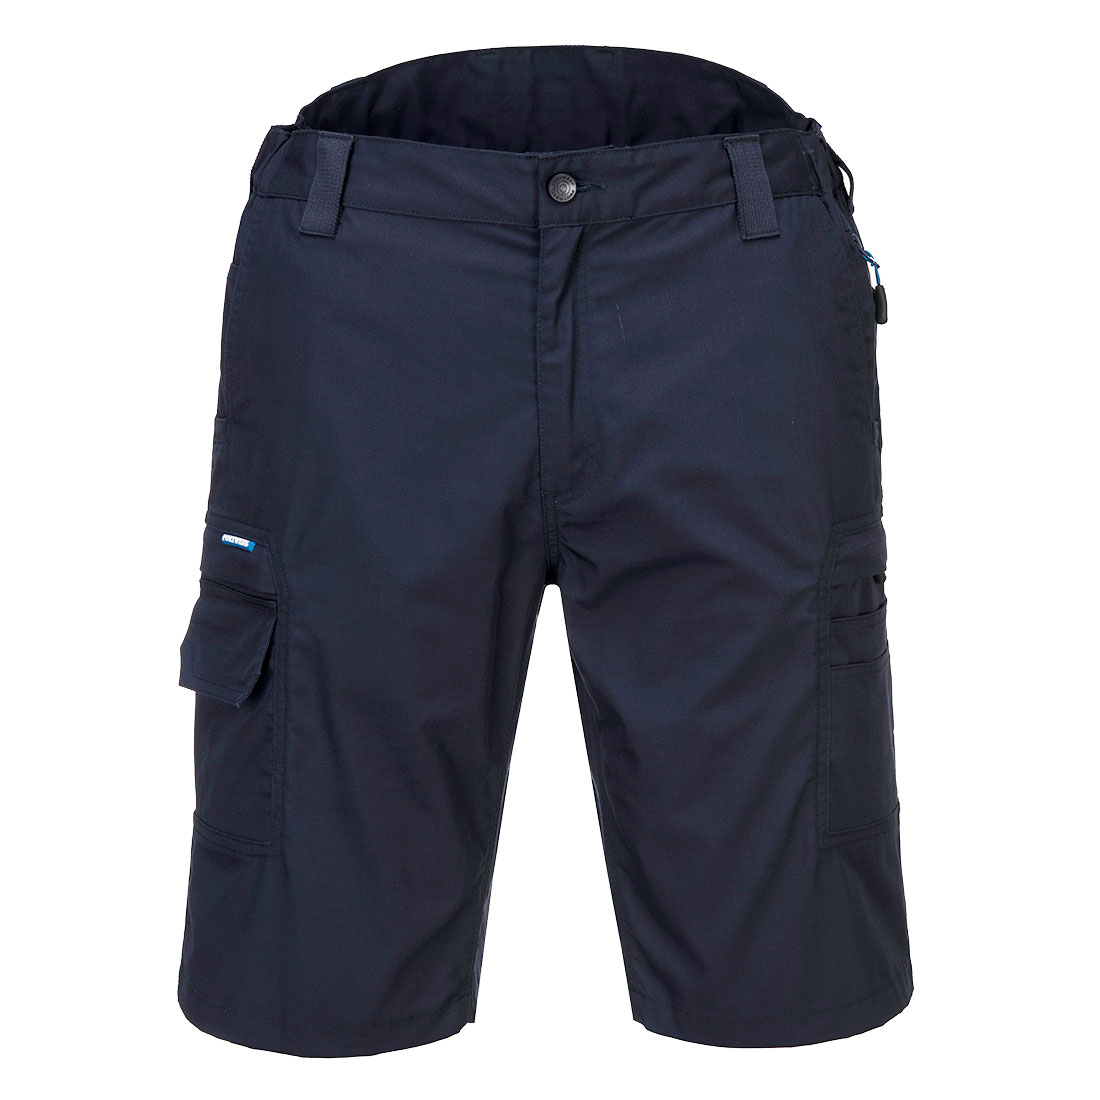 Classic Polycotton Multifunction Ripstop Work Shorts